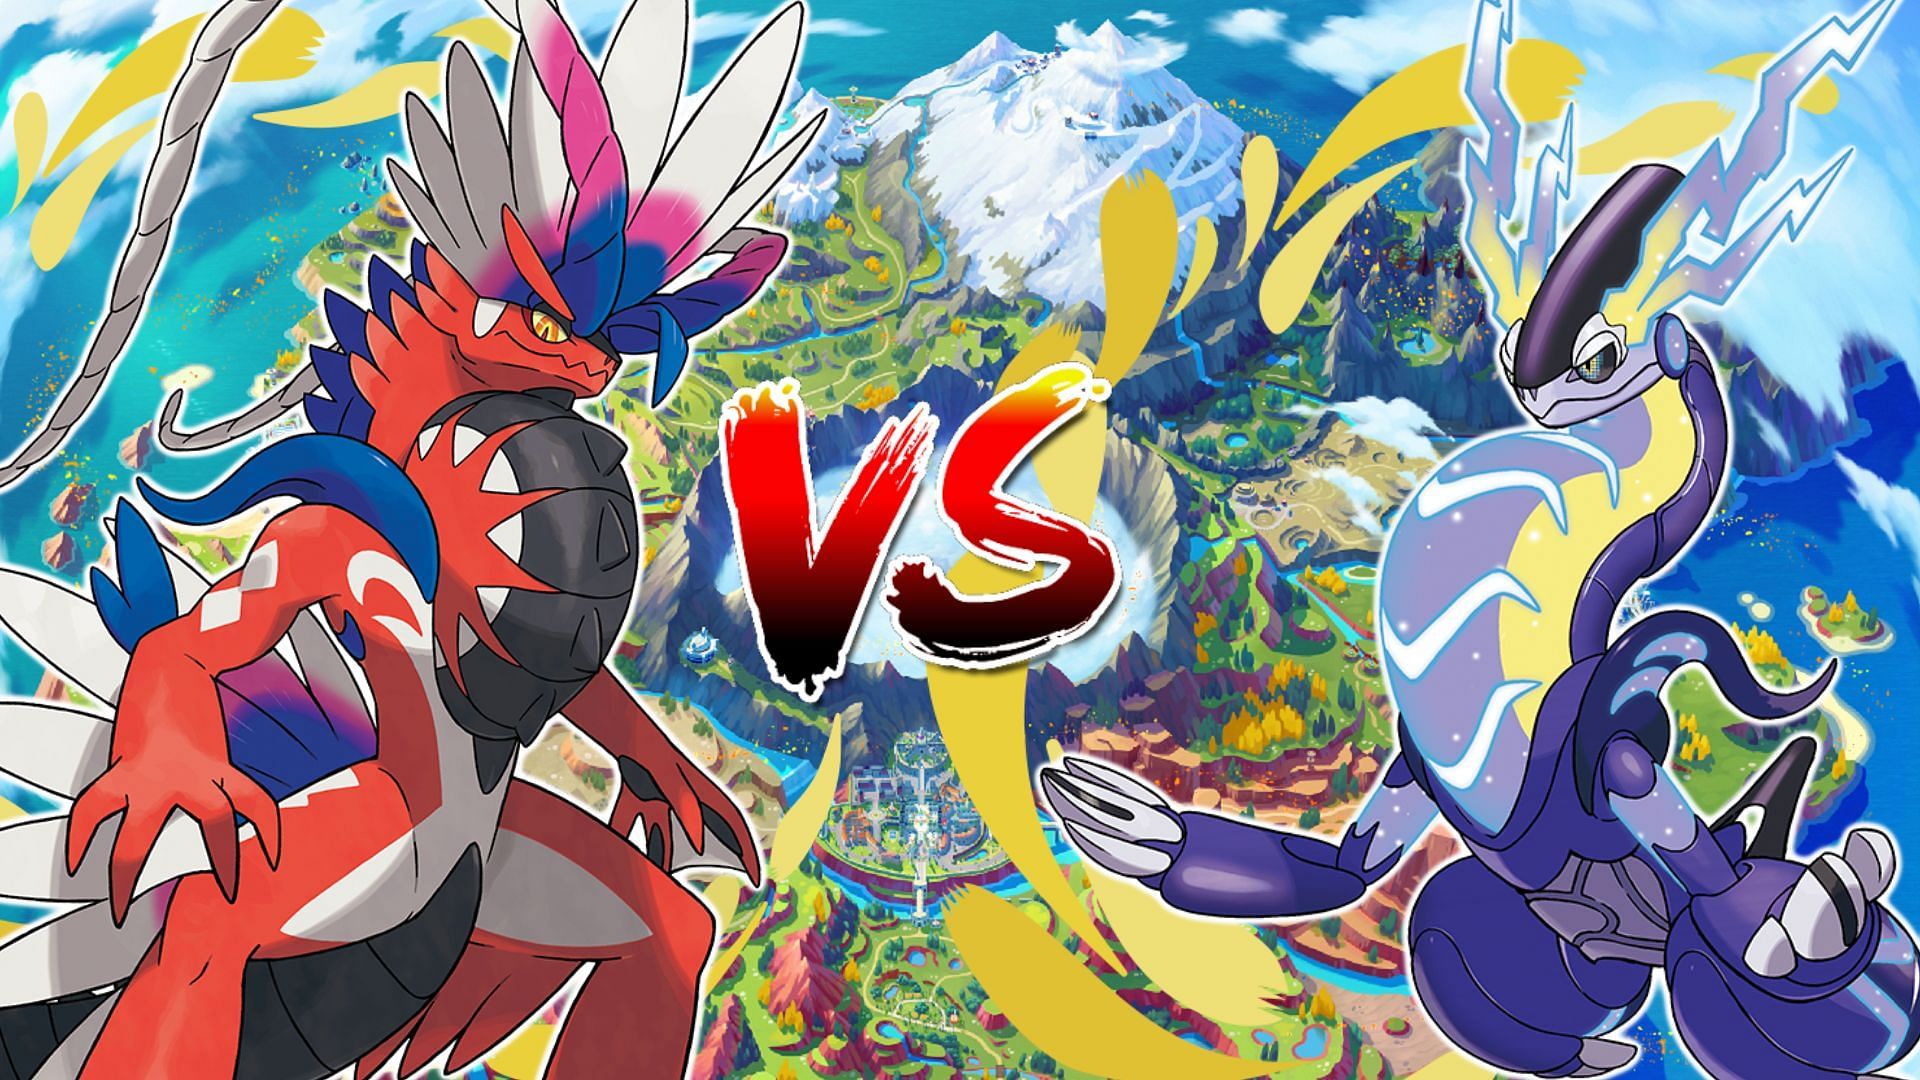 Koraidon and Miraidon are the mascots of Pokemon Scarlet and Violet respectively.